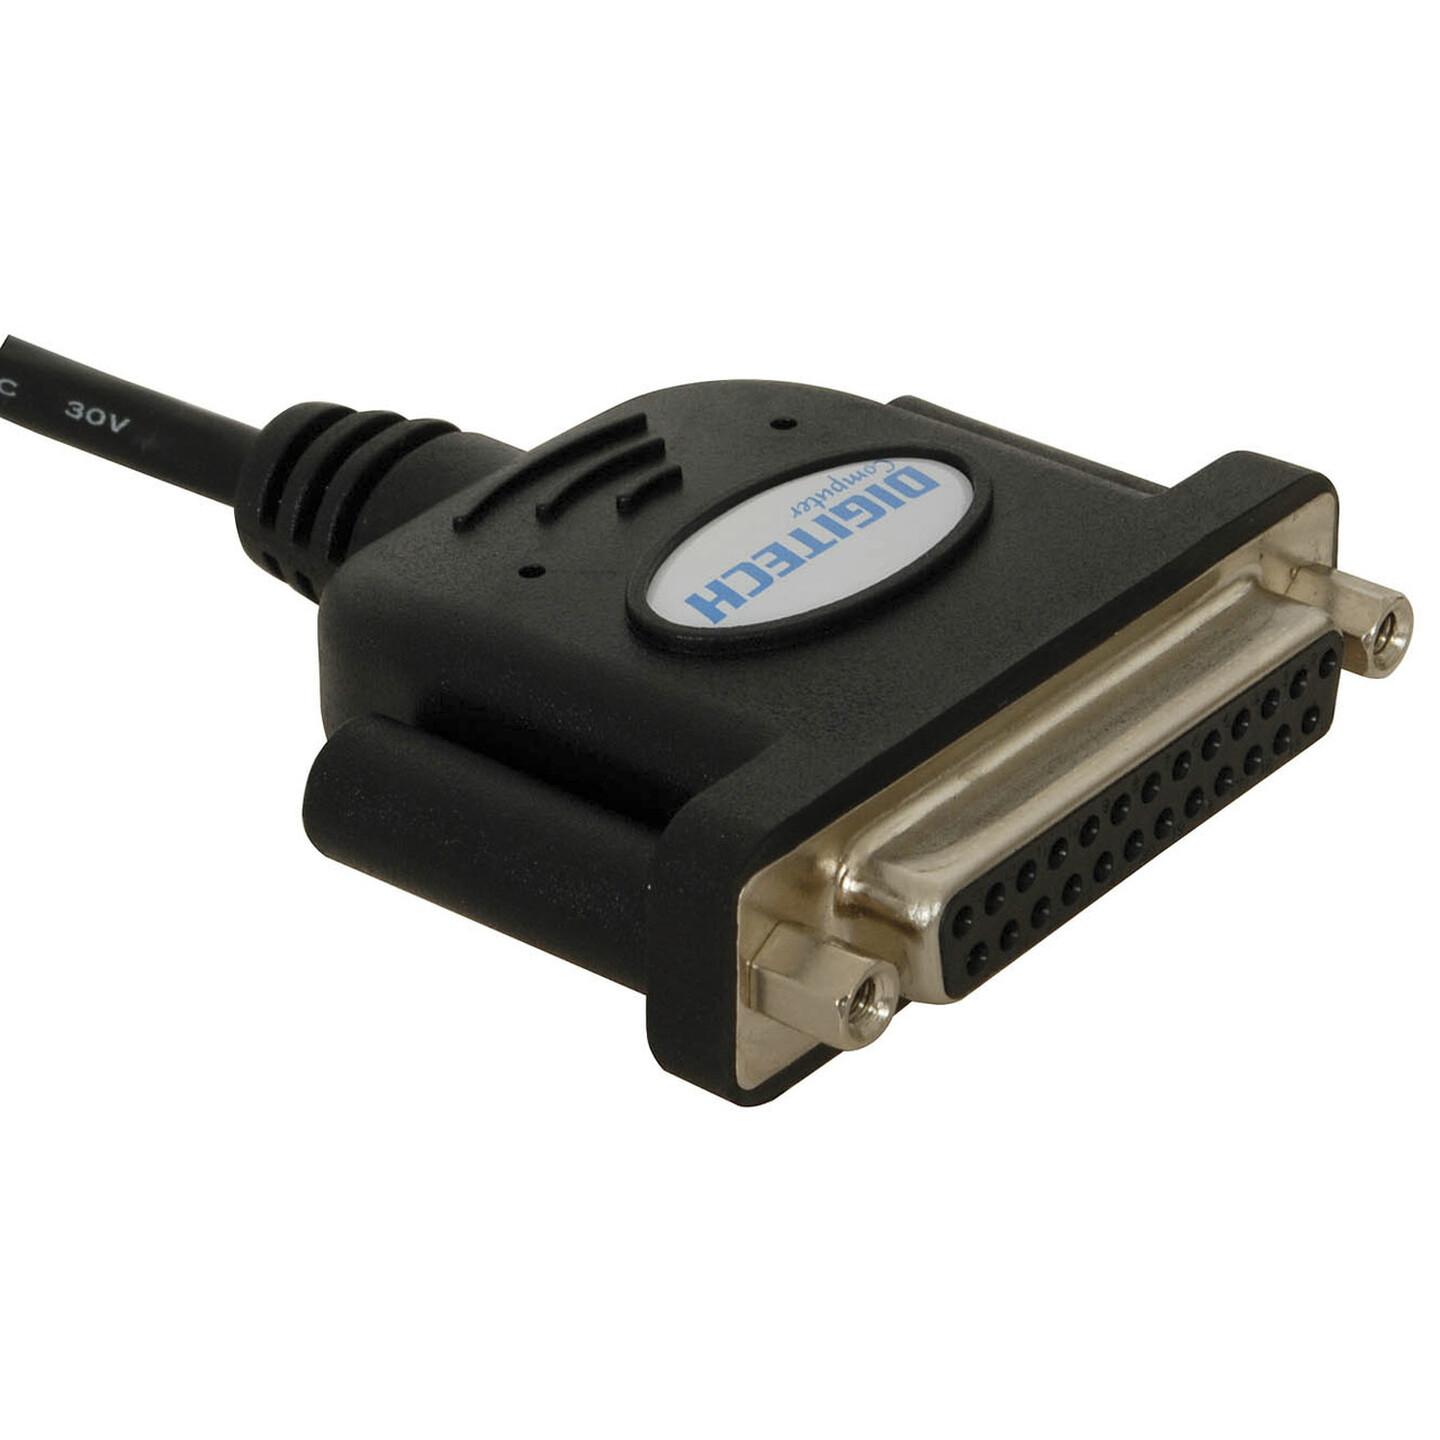 USB to Parallel Bi-Directional Cable